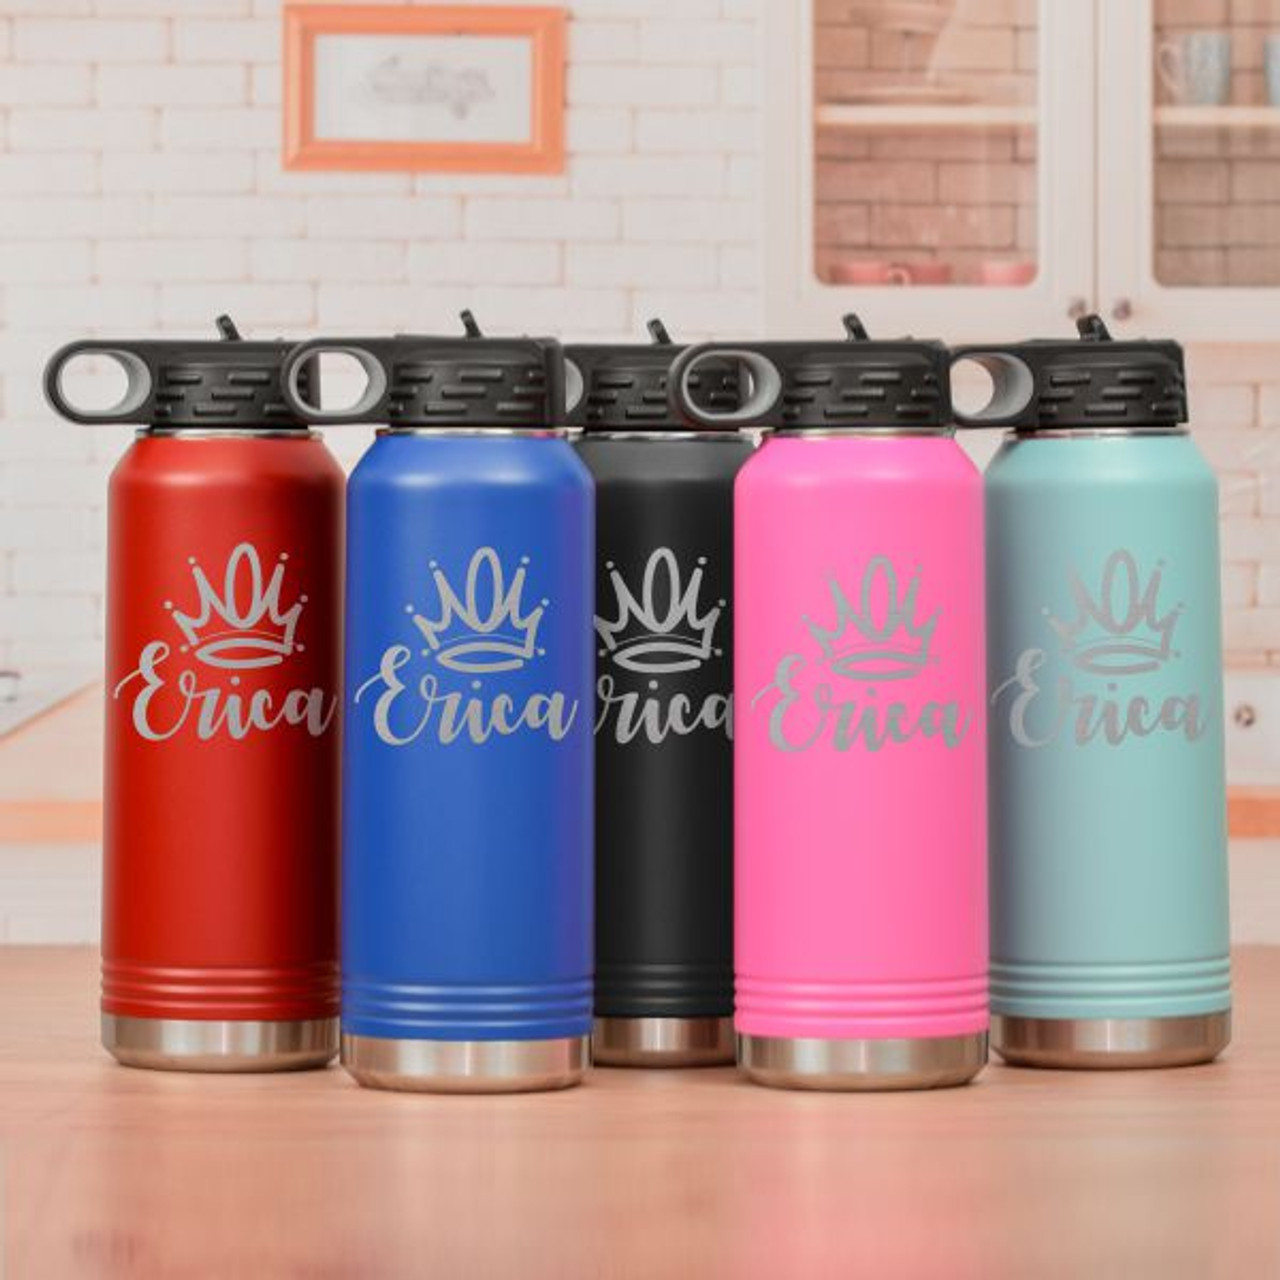 https://cdn11.bigcommerce.com/s-mdwz5t7wme/images/stencil/1280x1280/products/2778/6623/DW5126-All-Hail-the-Queen-water-bottle-colors__89846.1603214228.jpg?c=2?imbypass=on